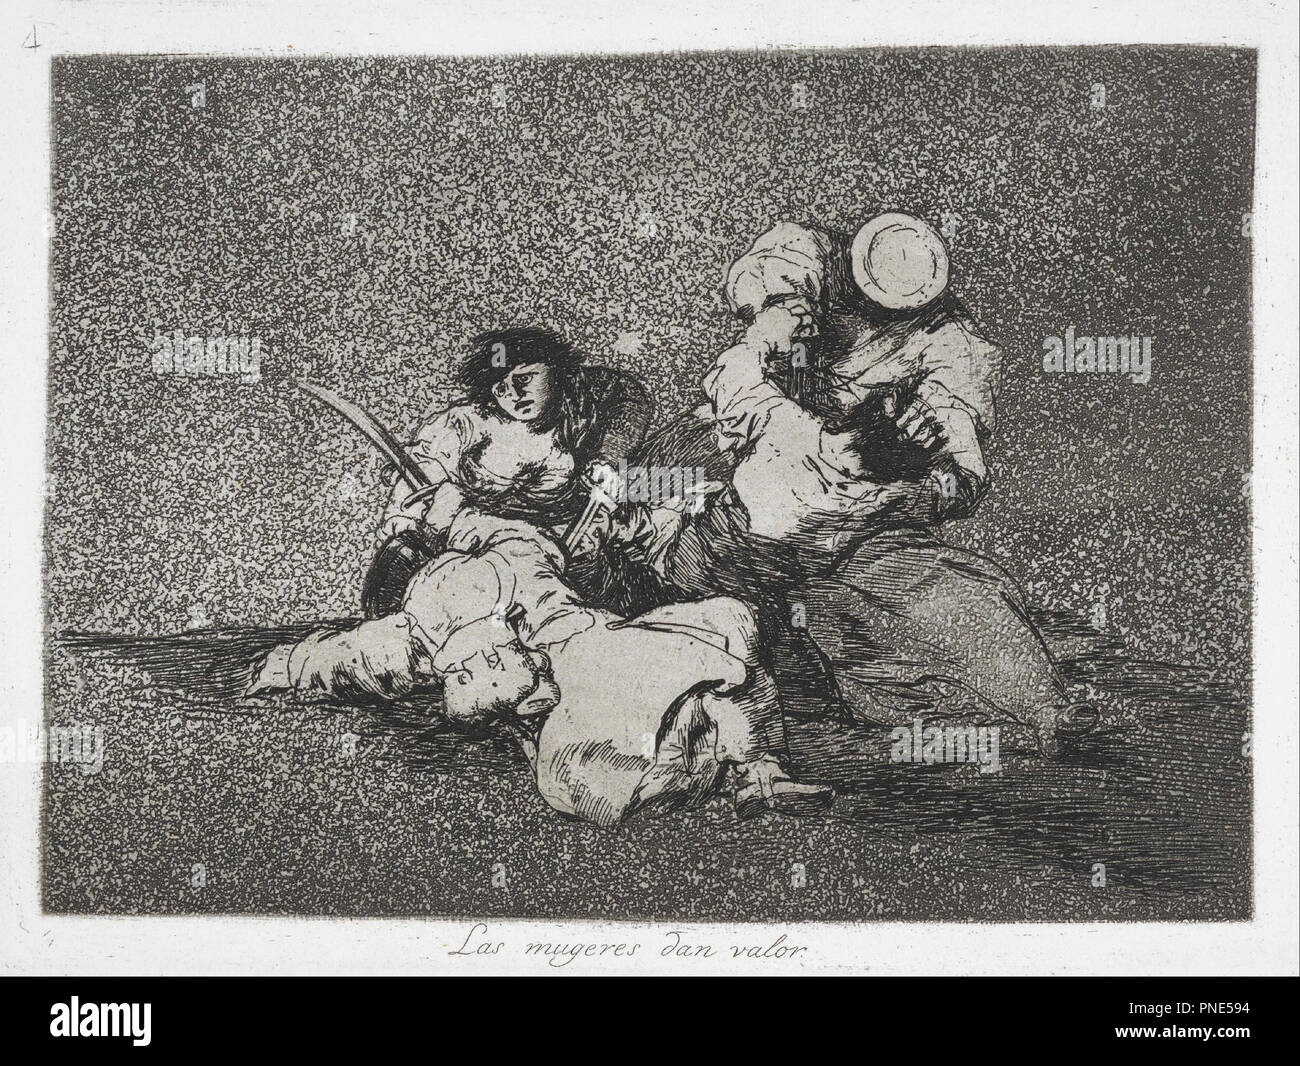 The women give courage (Las mugeres dan valor) from the series The Disasters of War (Los Desastres de la Guerra). Date/Period: 1810/1863. Etching with aquatint. Width: 44.7 cm. Height: 37.1 x d3.2 cm (with frame). Author: GOYA, FRANCISCO DE. Stock Photo